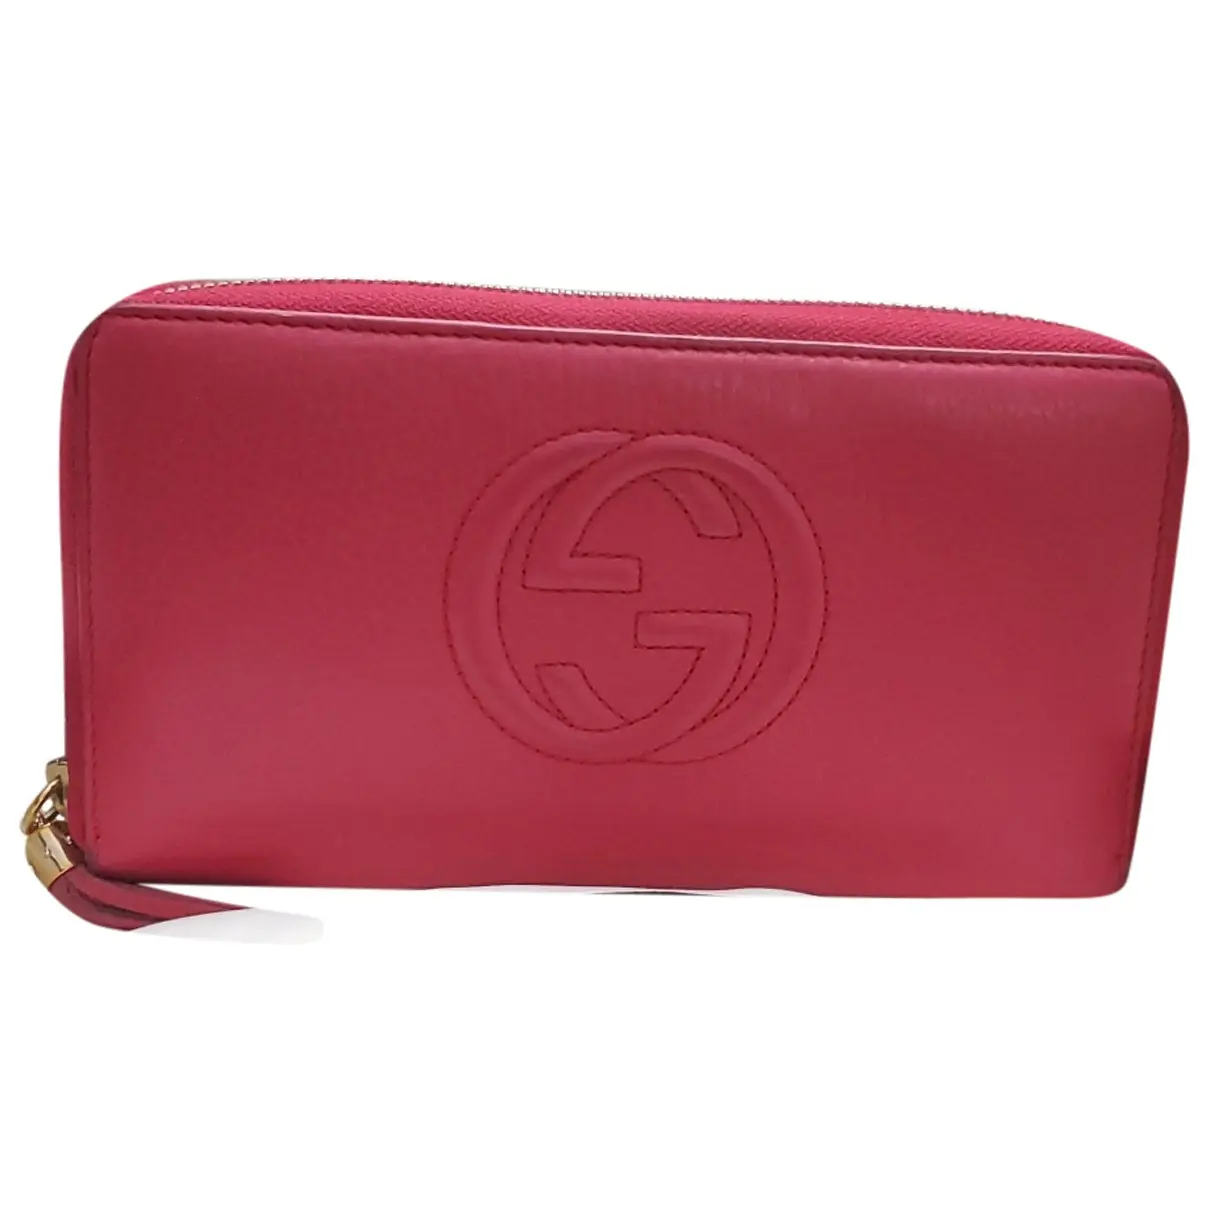 Soho leather wallet Gucci